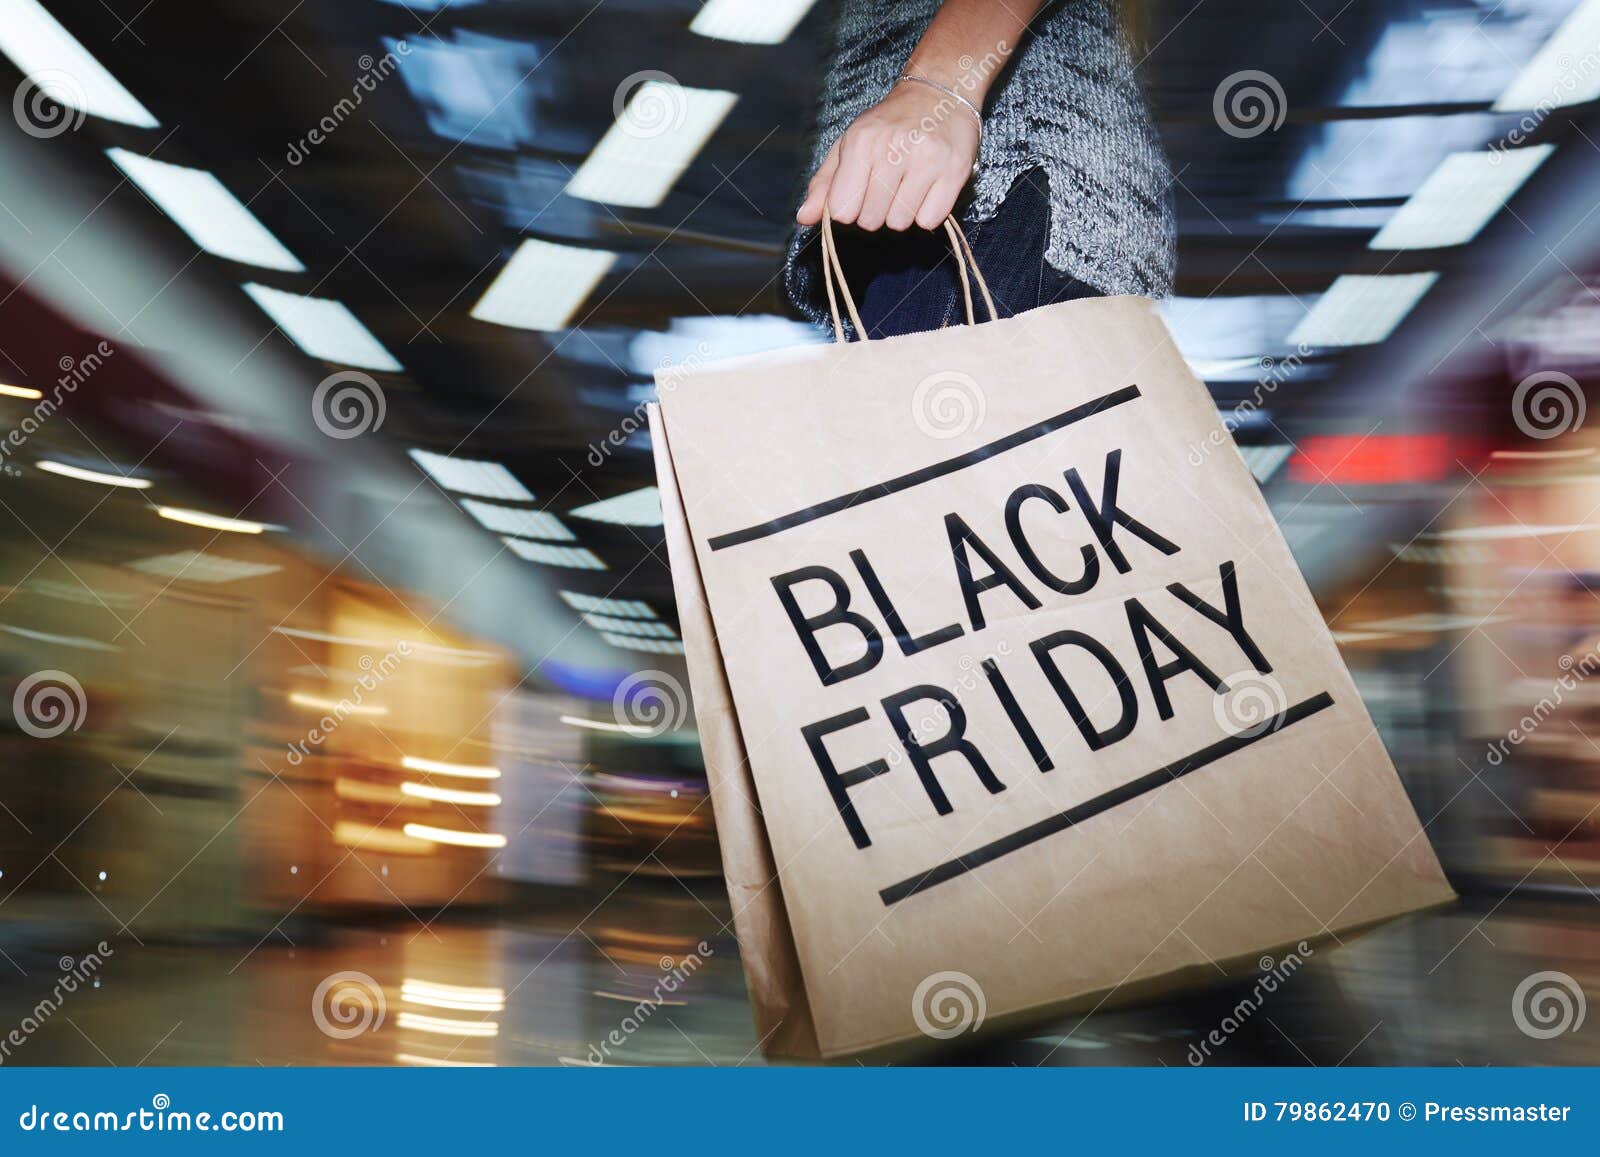 Buying fever stock photo. Image of human, shopper, retail - 79862470